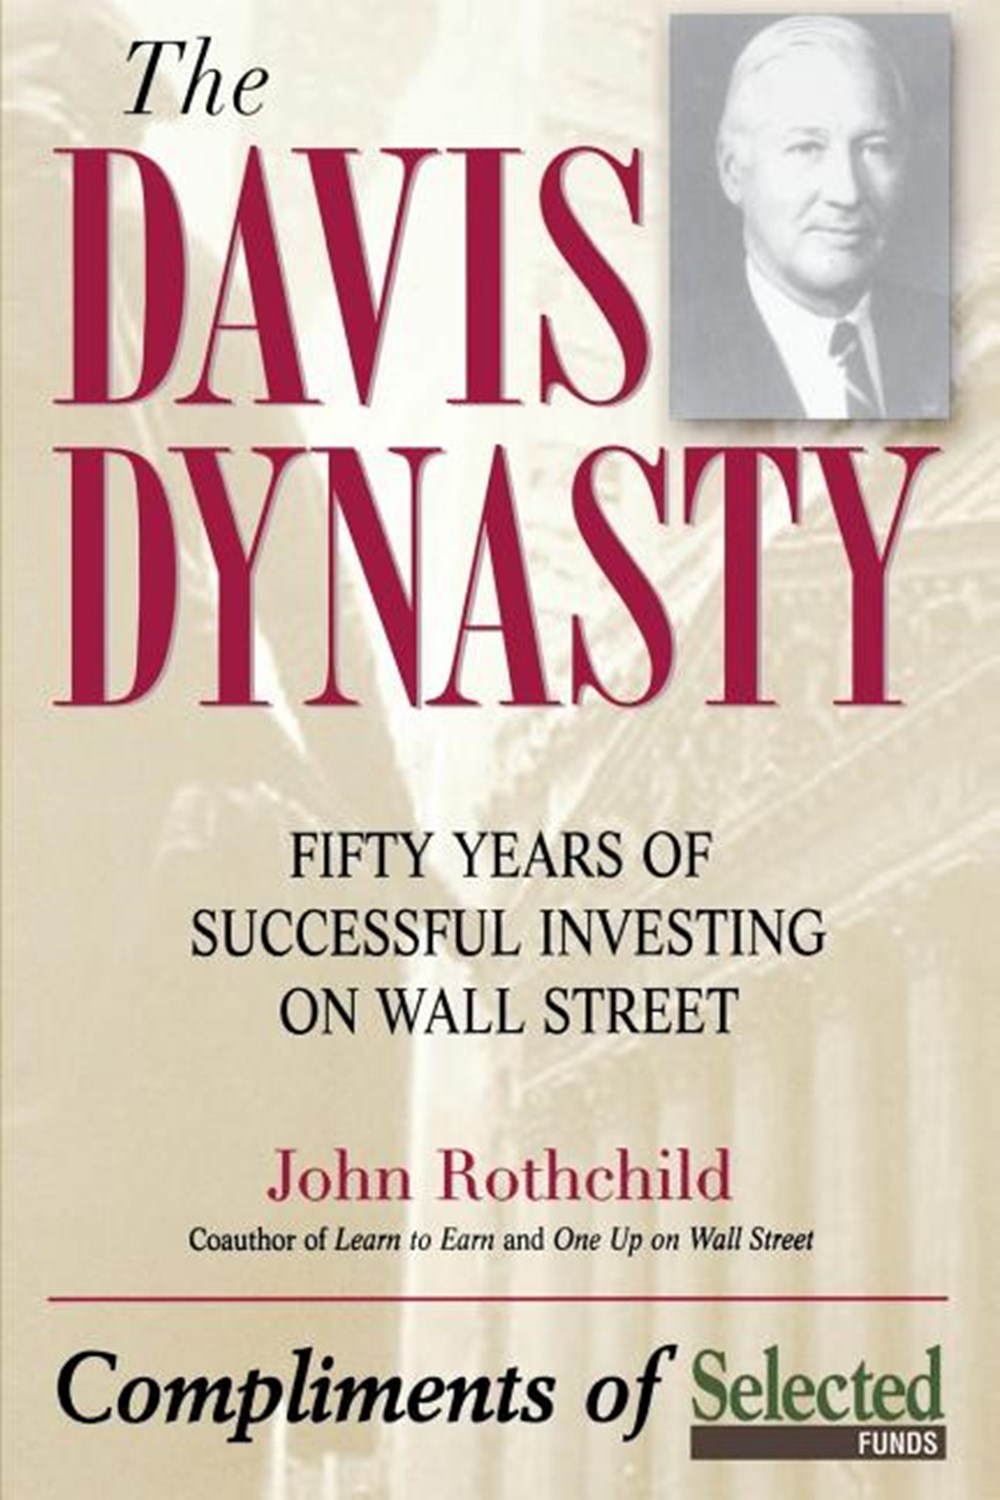 Davis Dynasty: Fifty Years of Successful Investing on Wall Street